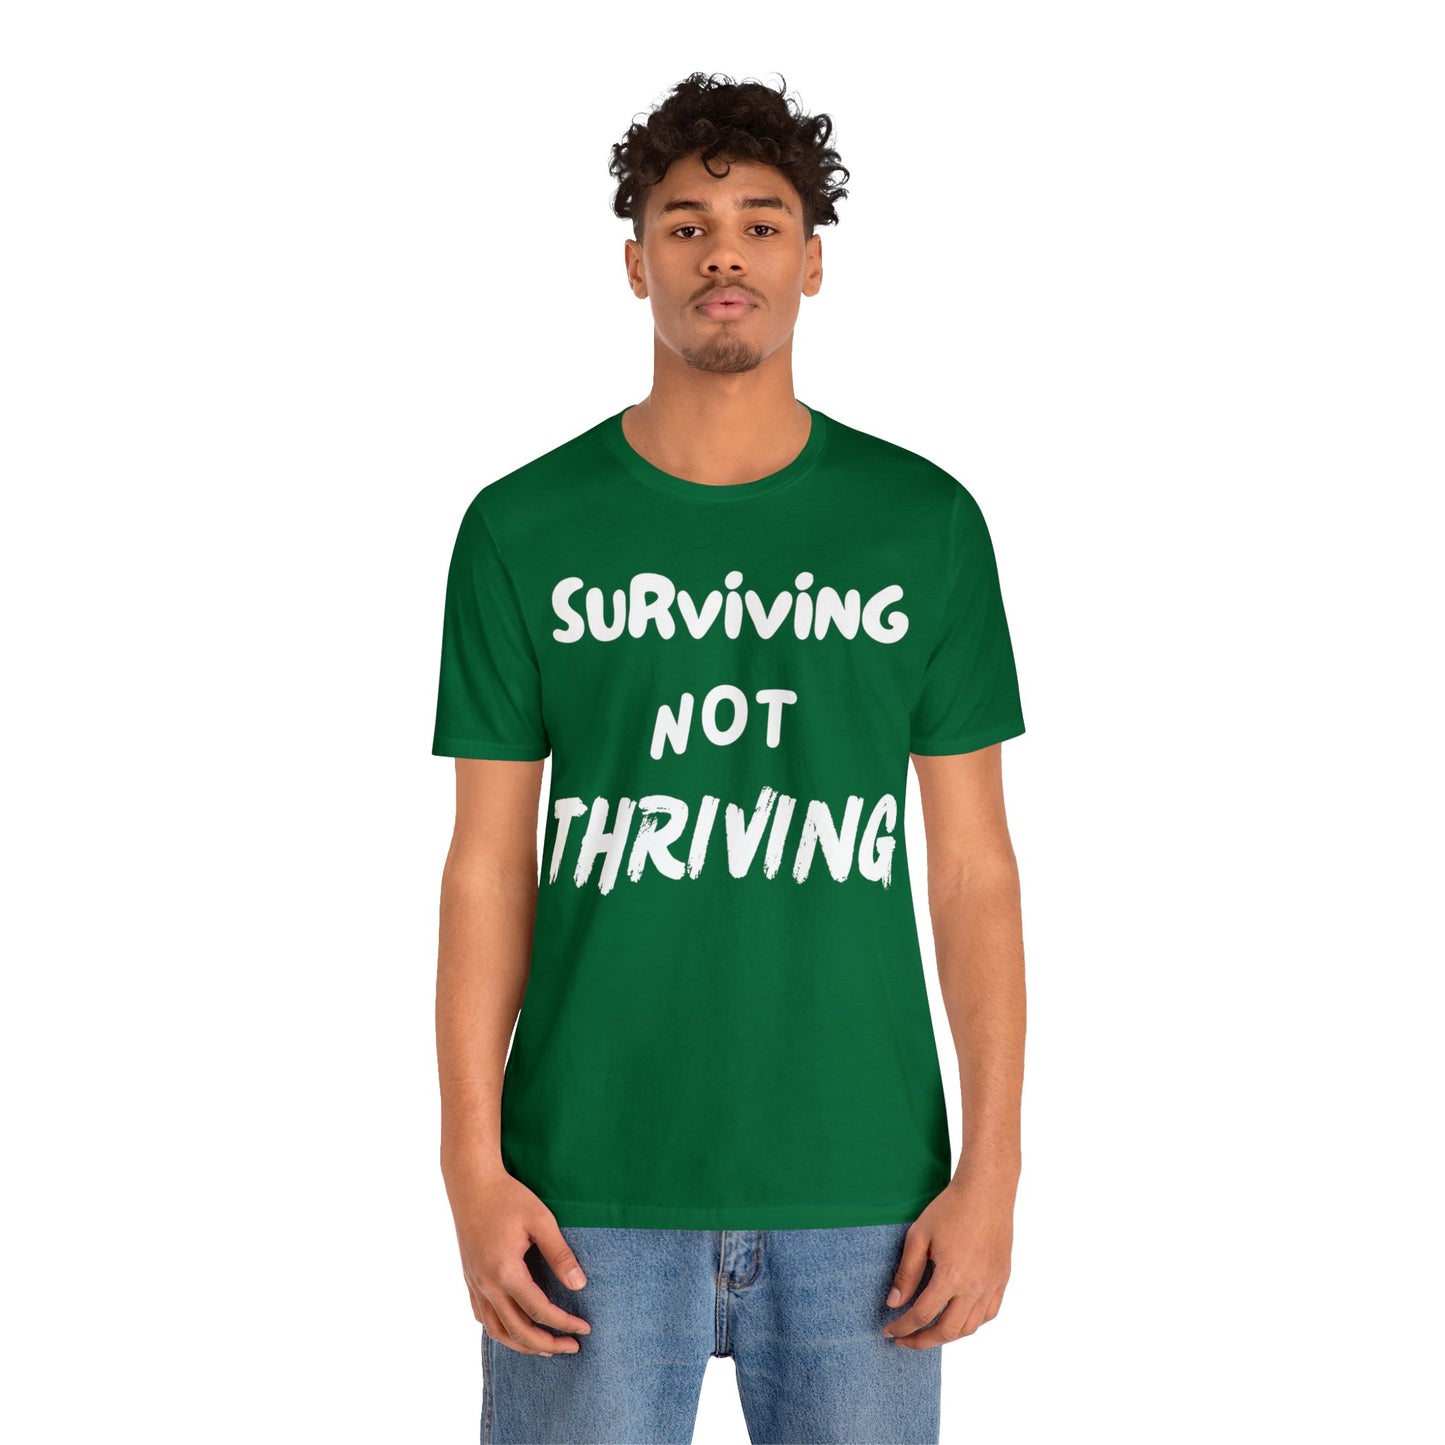 Surviving NOT Thriving w/White writing - Unisex Jersey Short Sleeve Tee